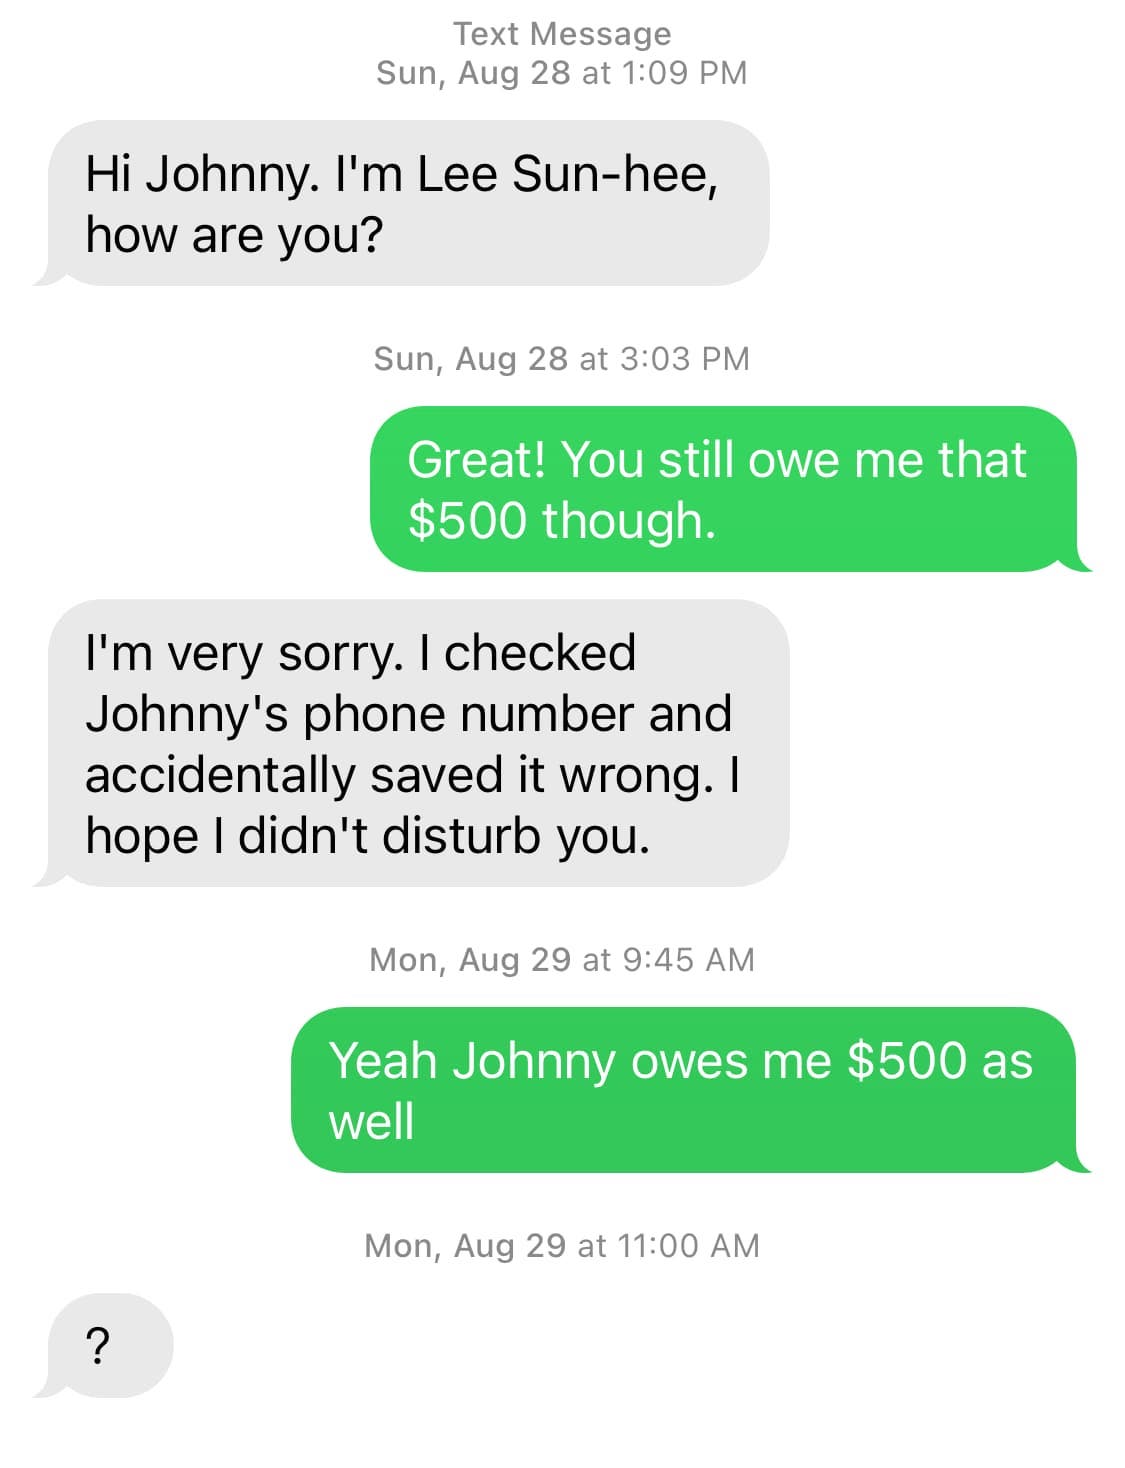 Screenshot. Them: Hi Johnny. I'm Lee Sun-hee, how are you? / Me: Great! You still owe me that $500 though. / Them: I'm very sorry. I checked Johnny's phone number and accidentally saved it wrong. I hope I didn't disturb you. / Me: Yeah Johnny owes me $500 as well. // By the way, if you're using a screen reader, please let me know if these captions are useful. Thanks!